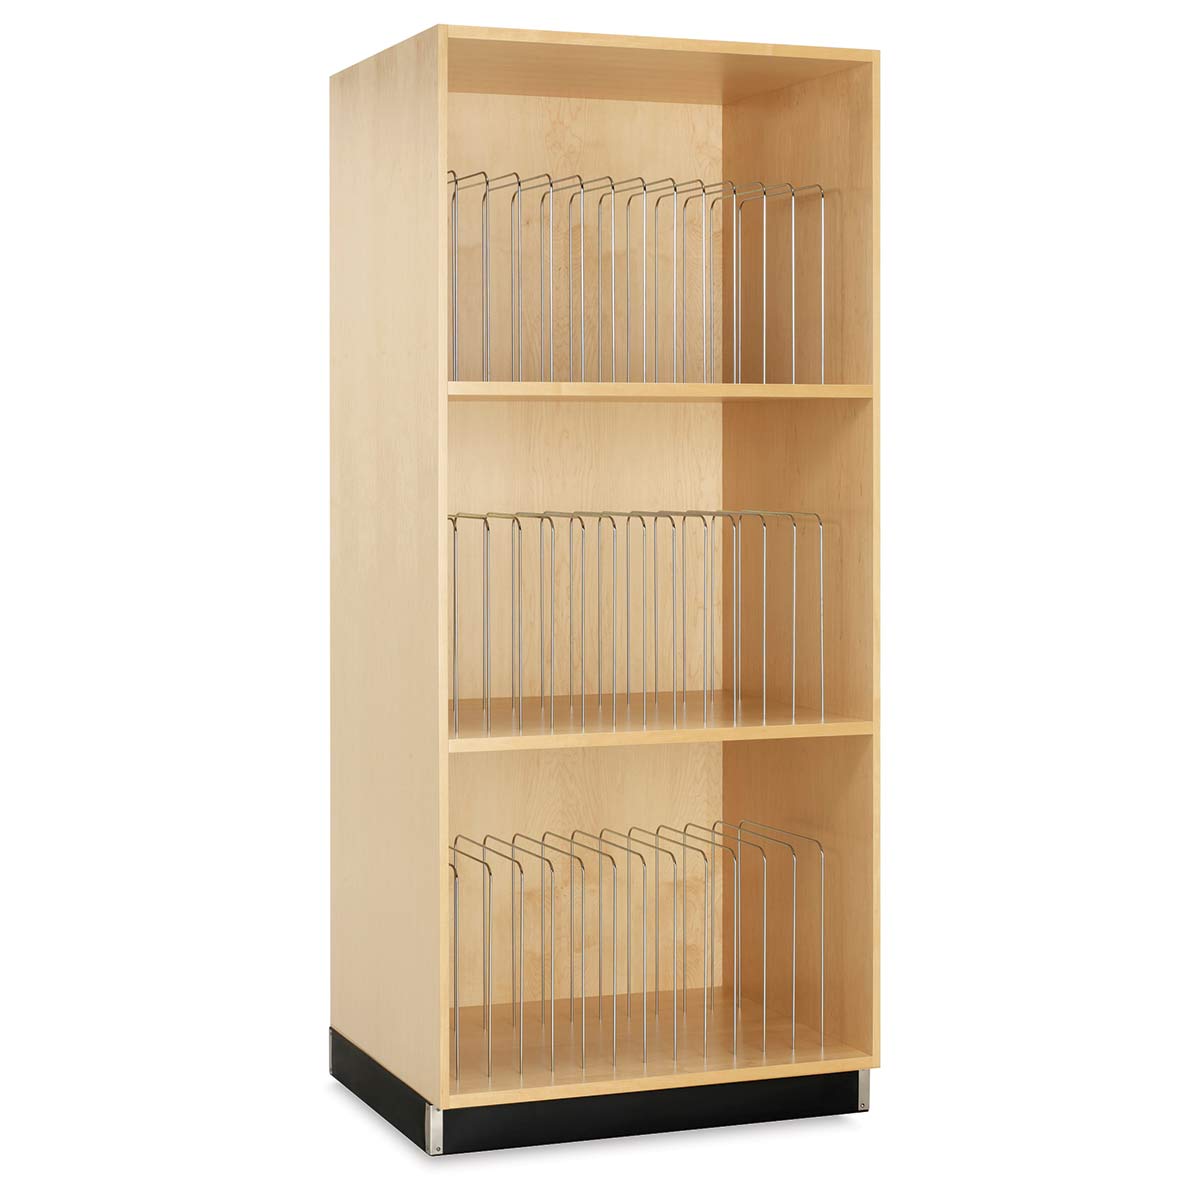 Art Storage System for the storage of art made by Art Boards™ Archival Art  Storage Supply.